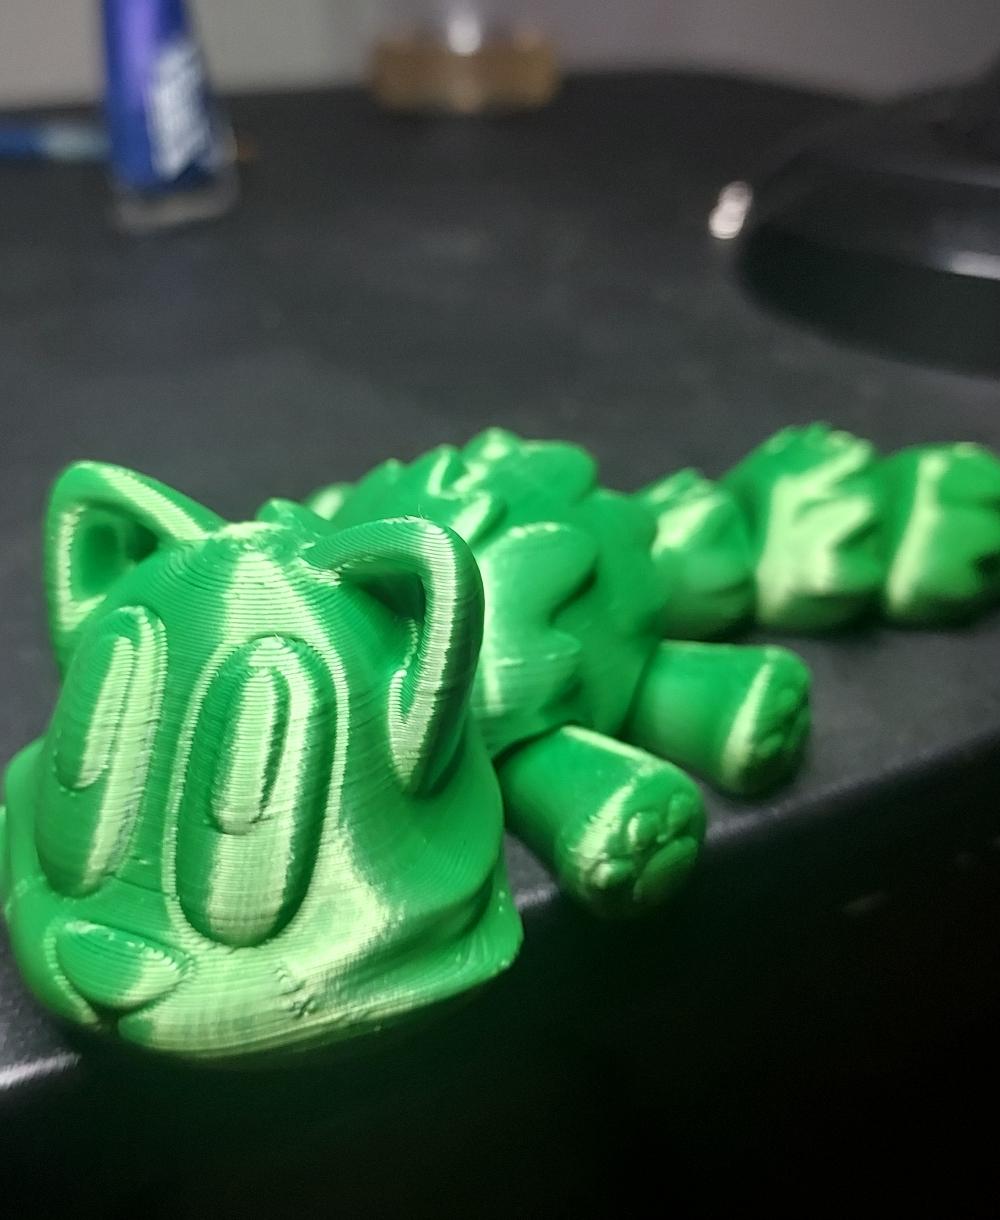 Blob Cat - Articulated Flexi Fidget Toy - First print in over a year, and didn't even have to level the bed to get this result. 😎 - 3d model